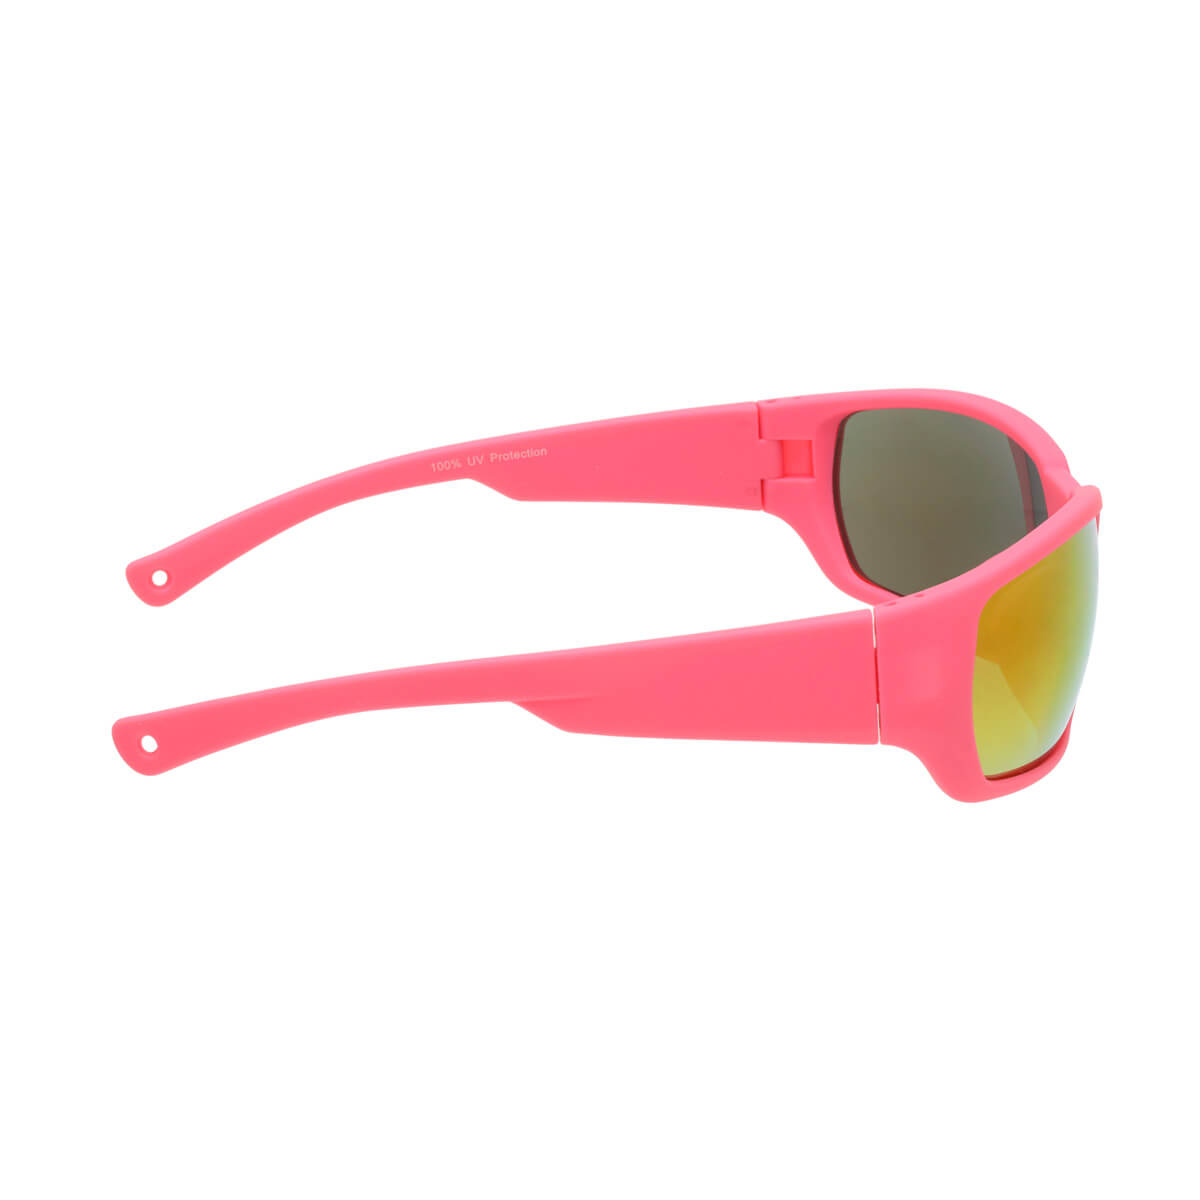 Colorful sunglasses for sports